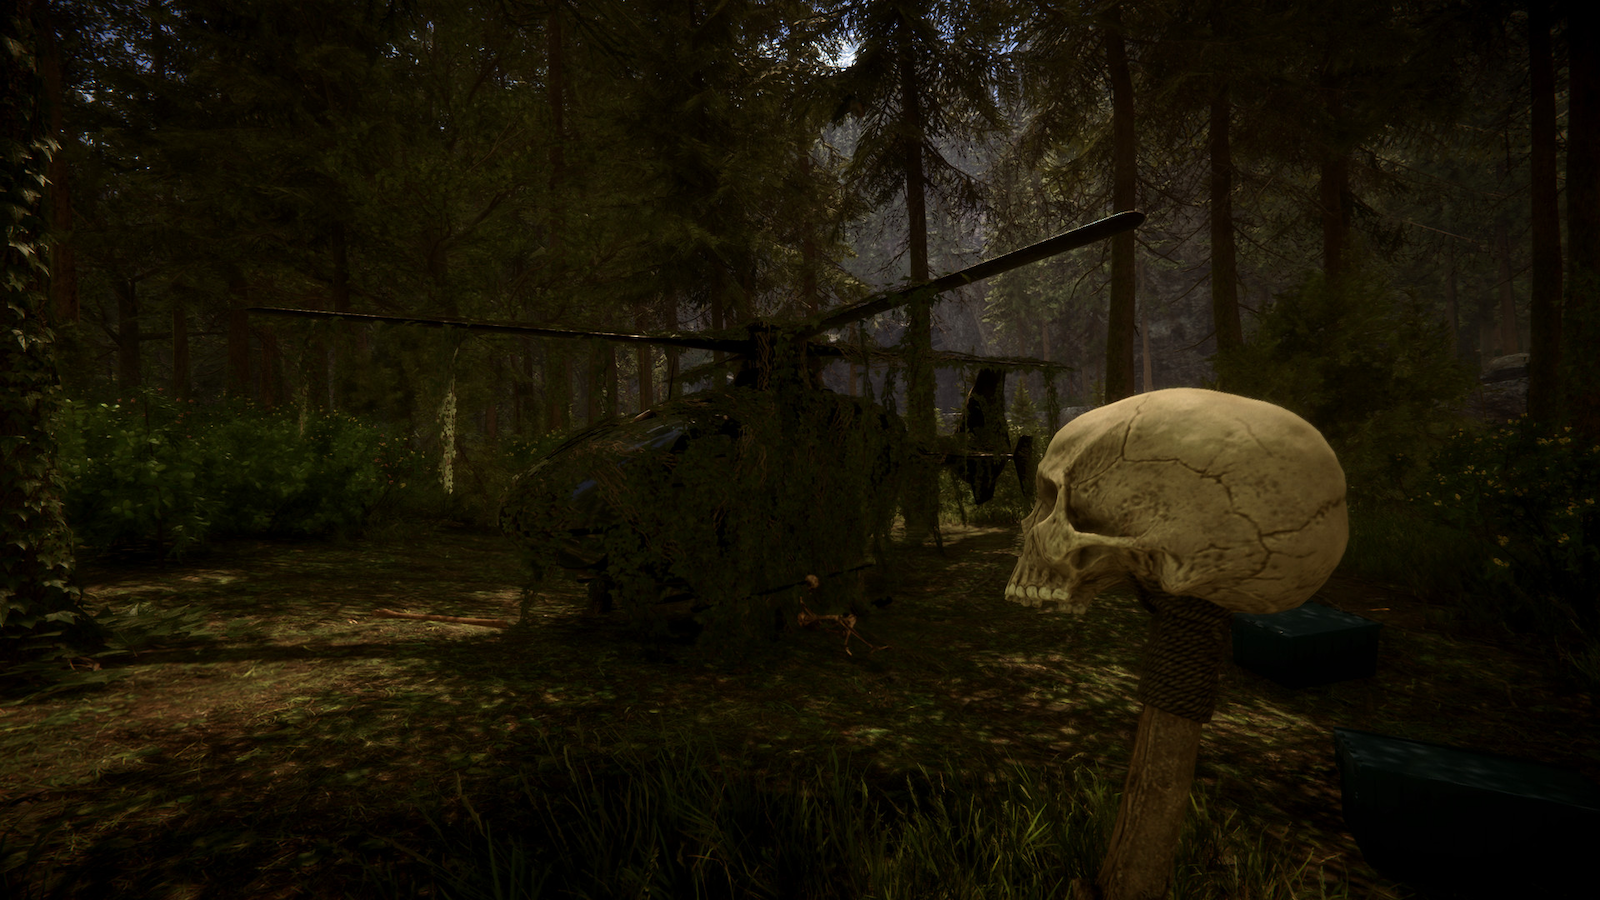 Sons of the Forest delayed so it can be the next step in survival games